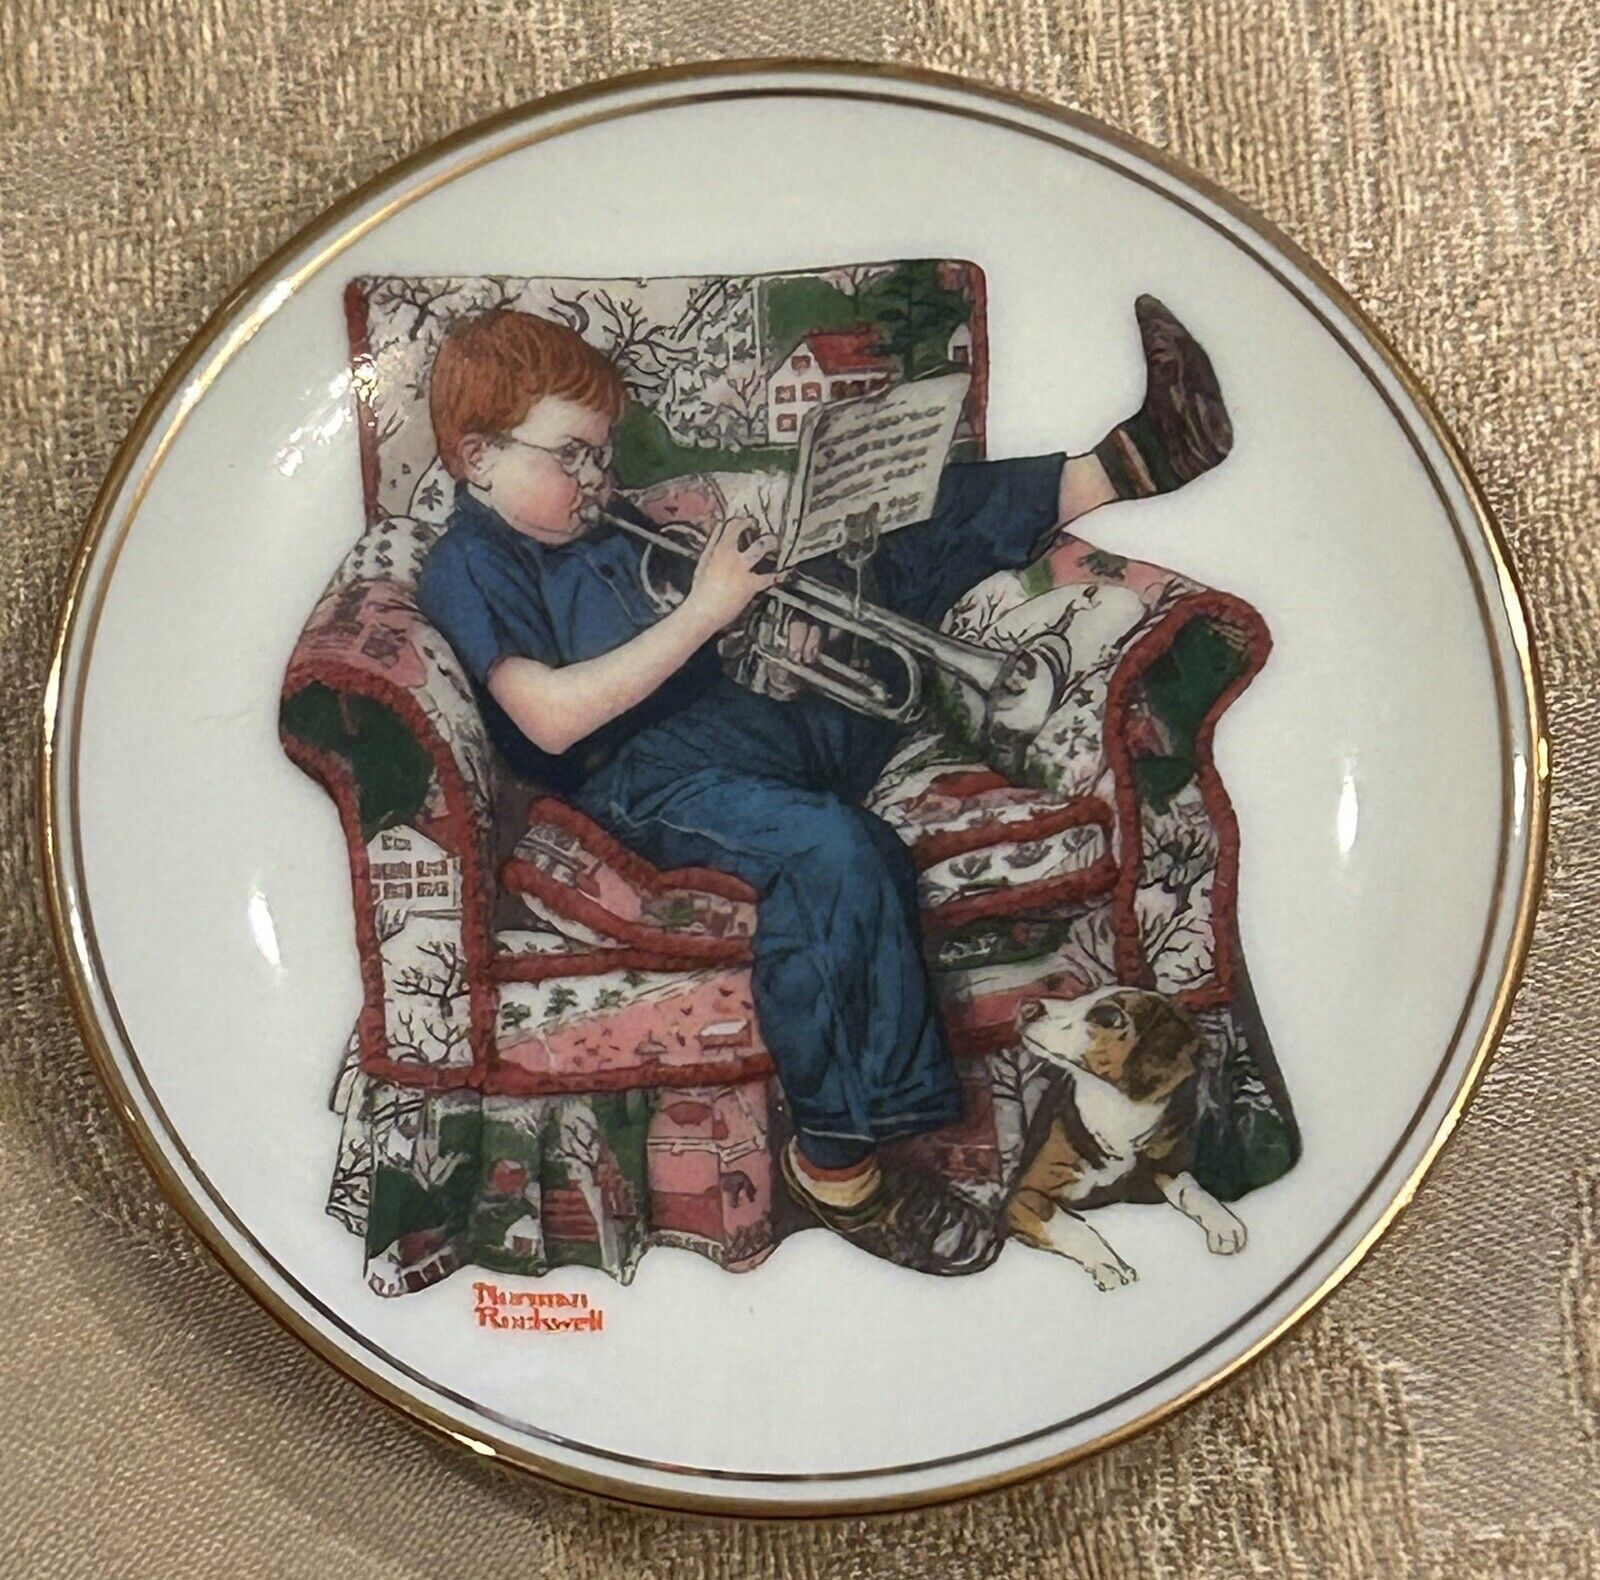 Norman Rockwell Miniature Collector’s Plate  “PRACTICE” Vintage D1-32